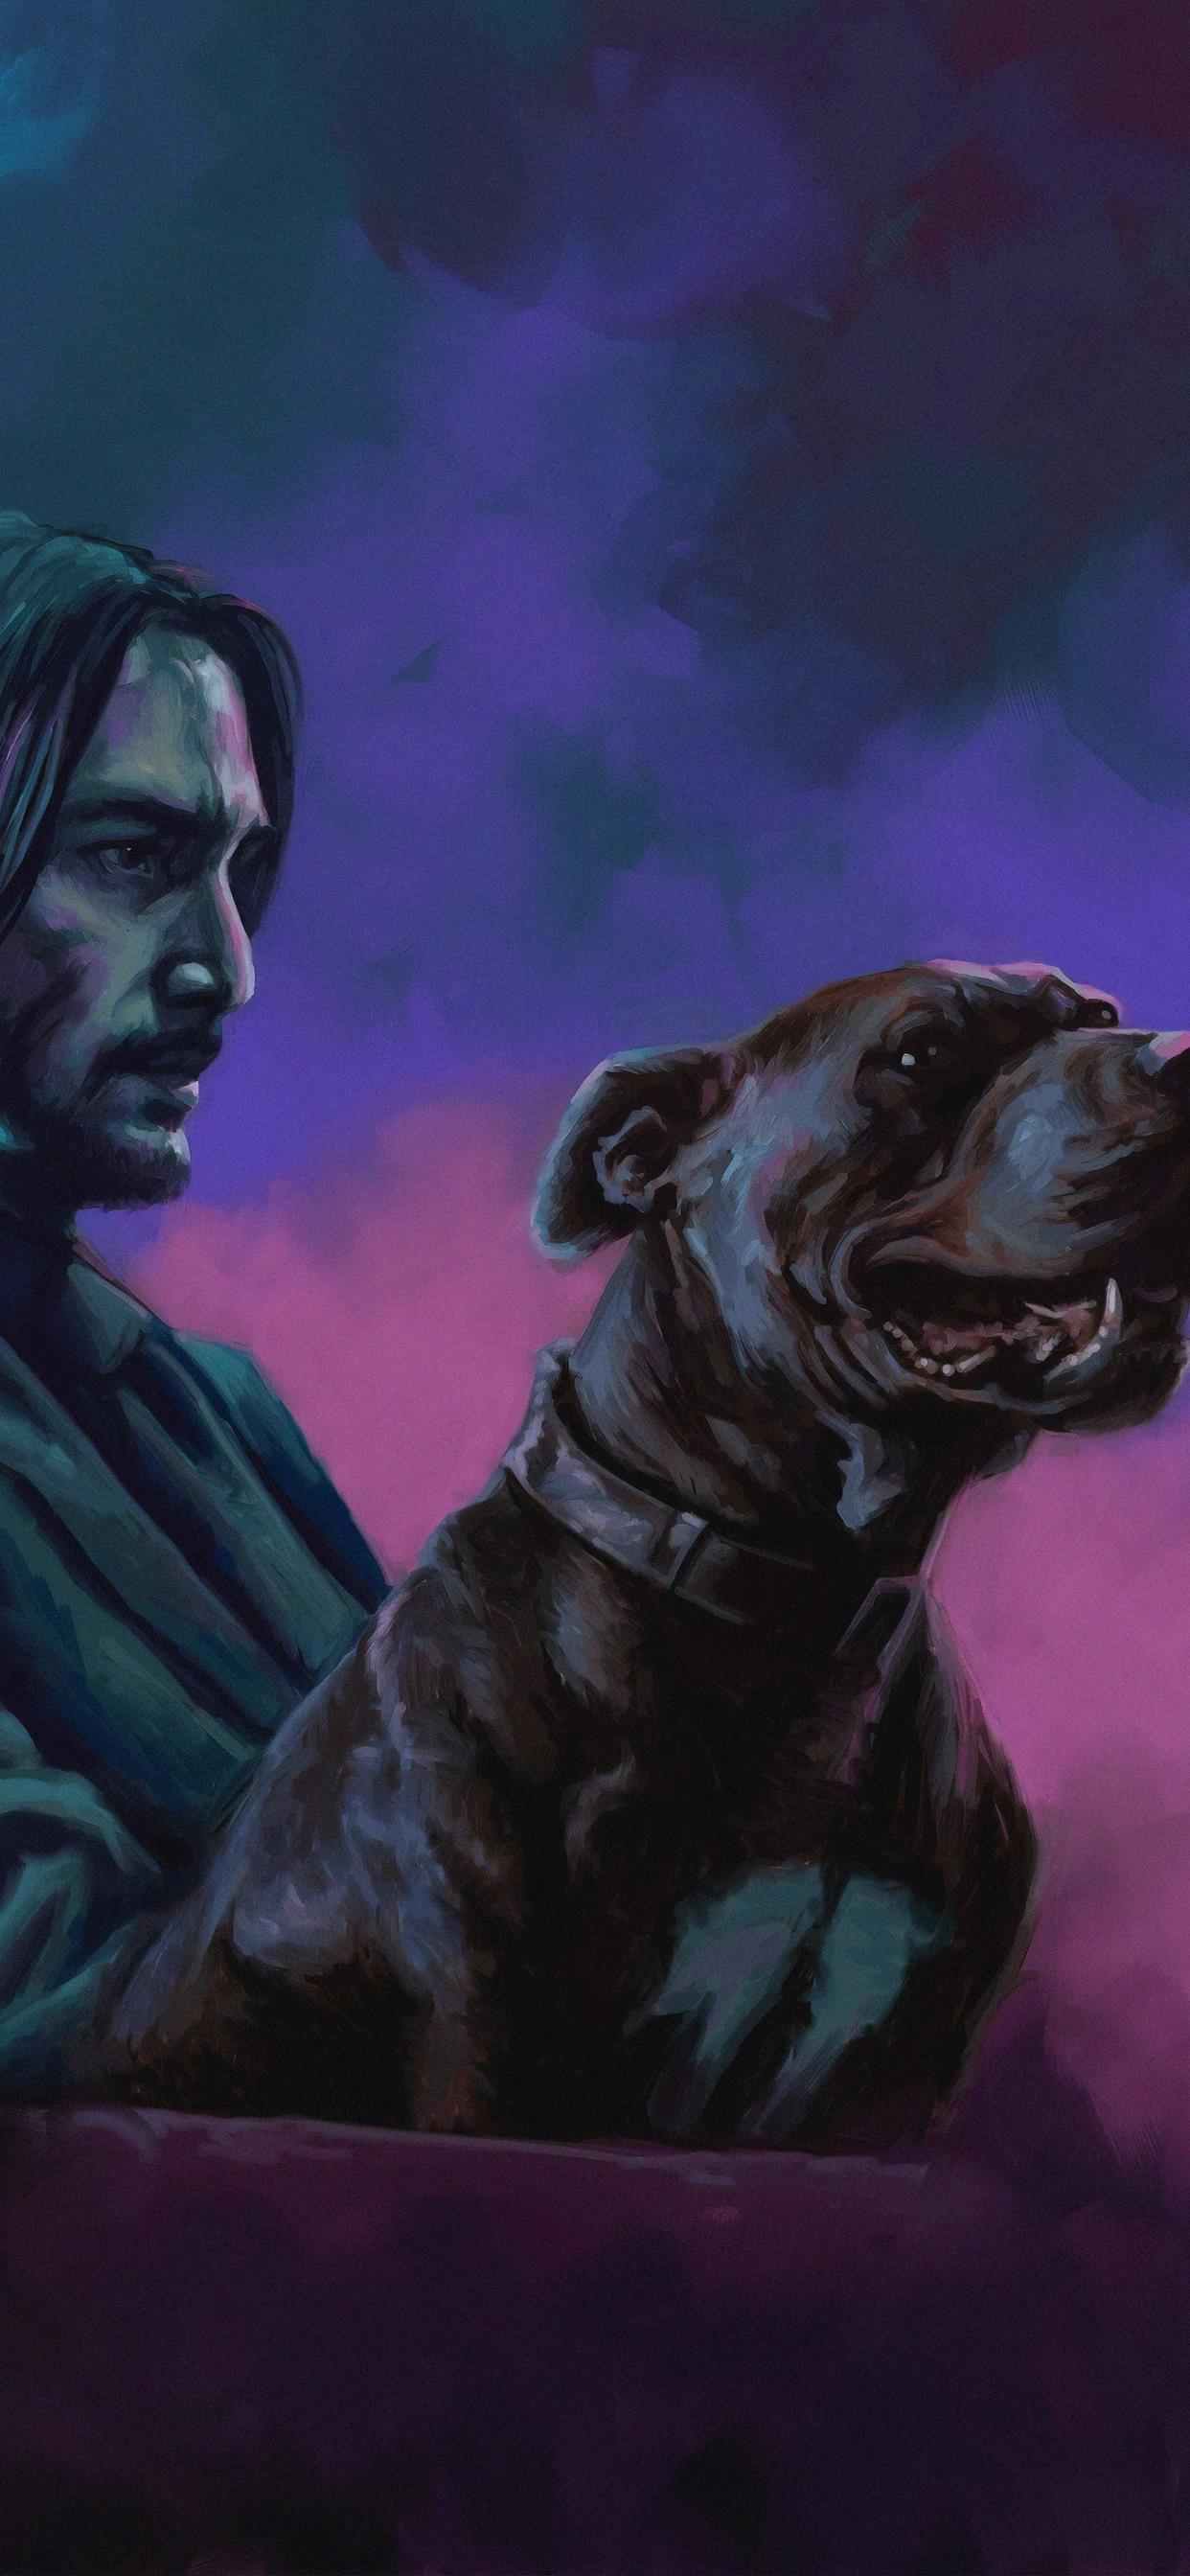 john wick with dog iPhone Wallpaper Free Download